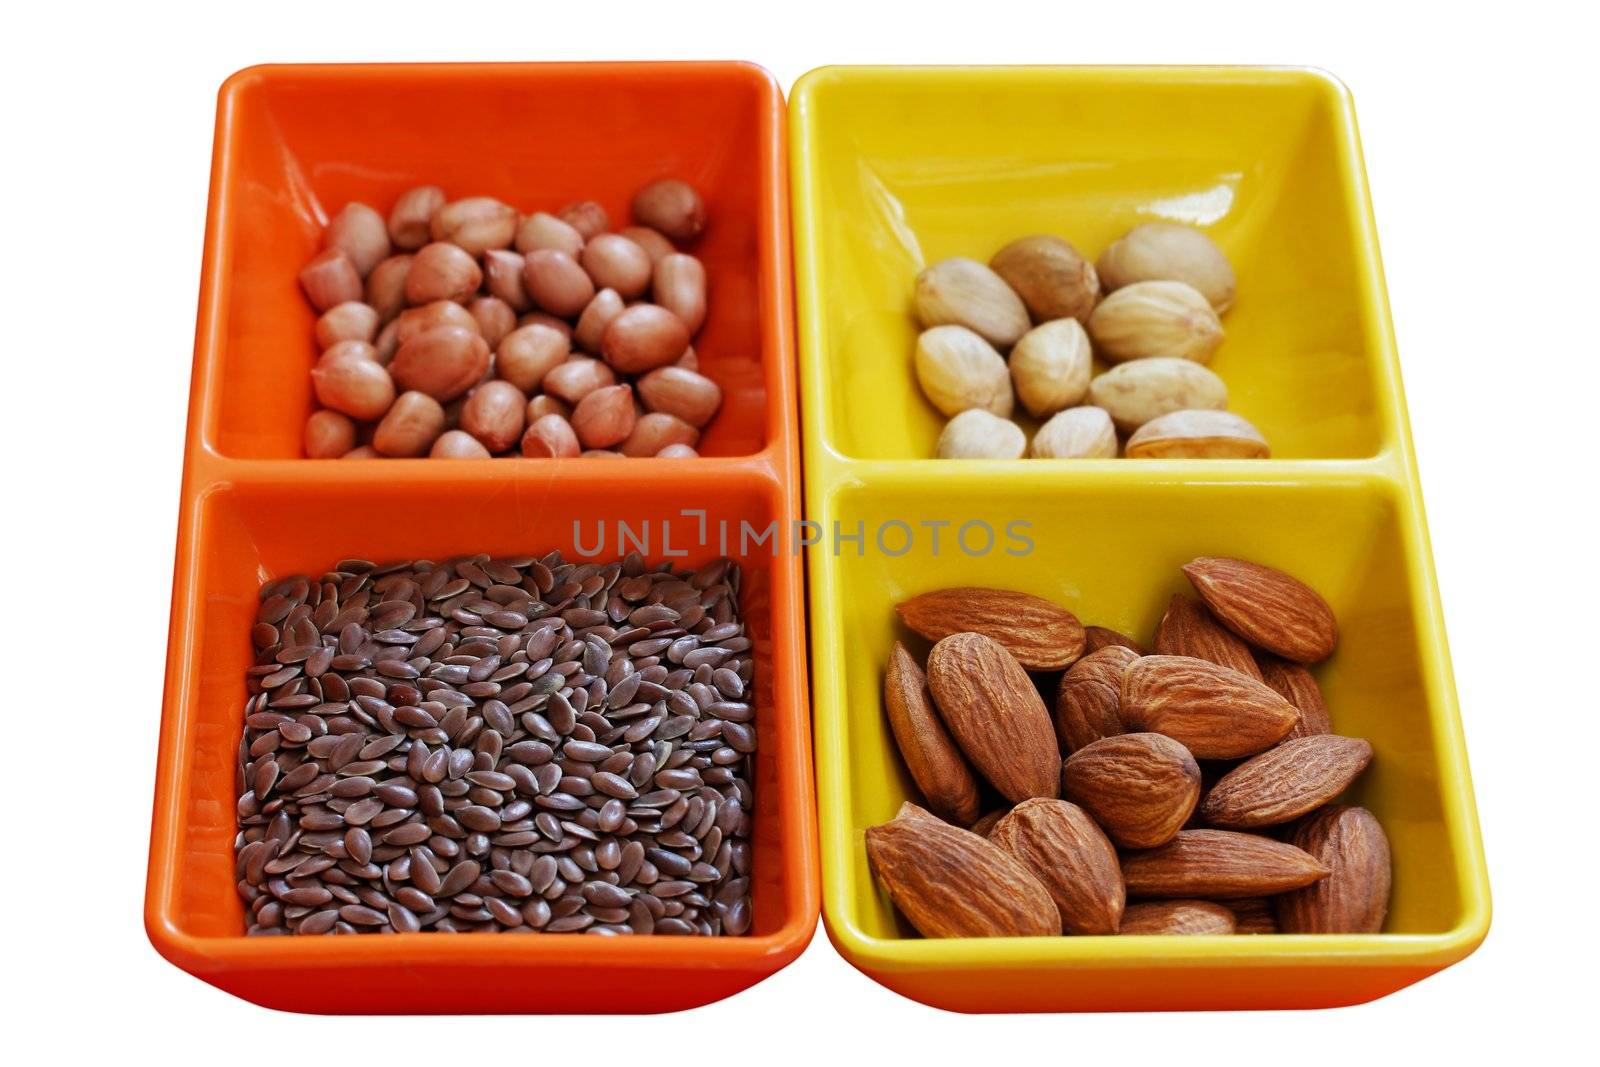 Dry fruit seeds - almond, pistachio, peanut and flaxseed in colorful containers